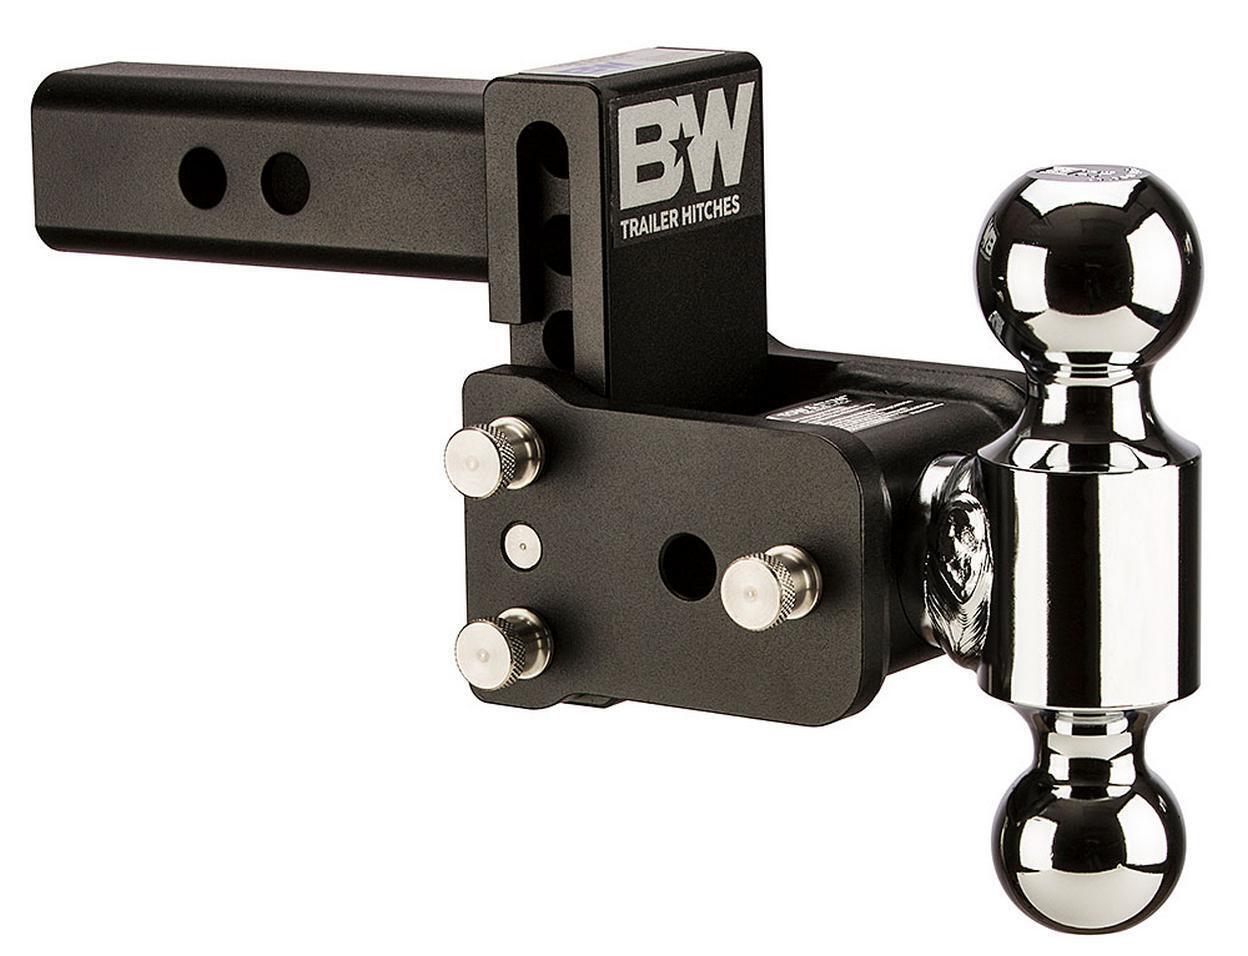 B&W Trailer Hitches Trailer Hitch Ball Mount - B&W Tow And Stow Dual Ball 2\